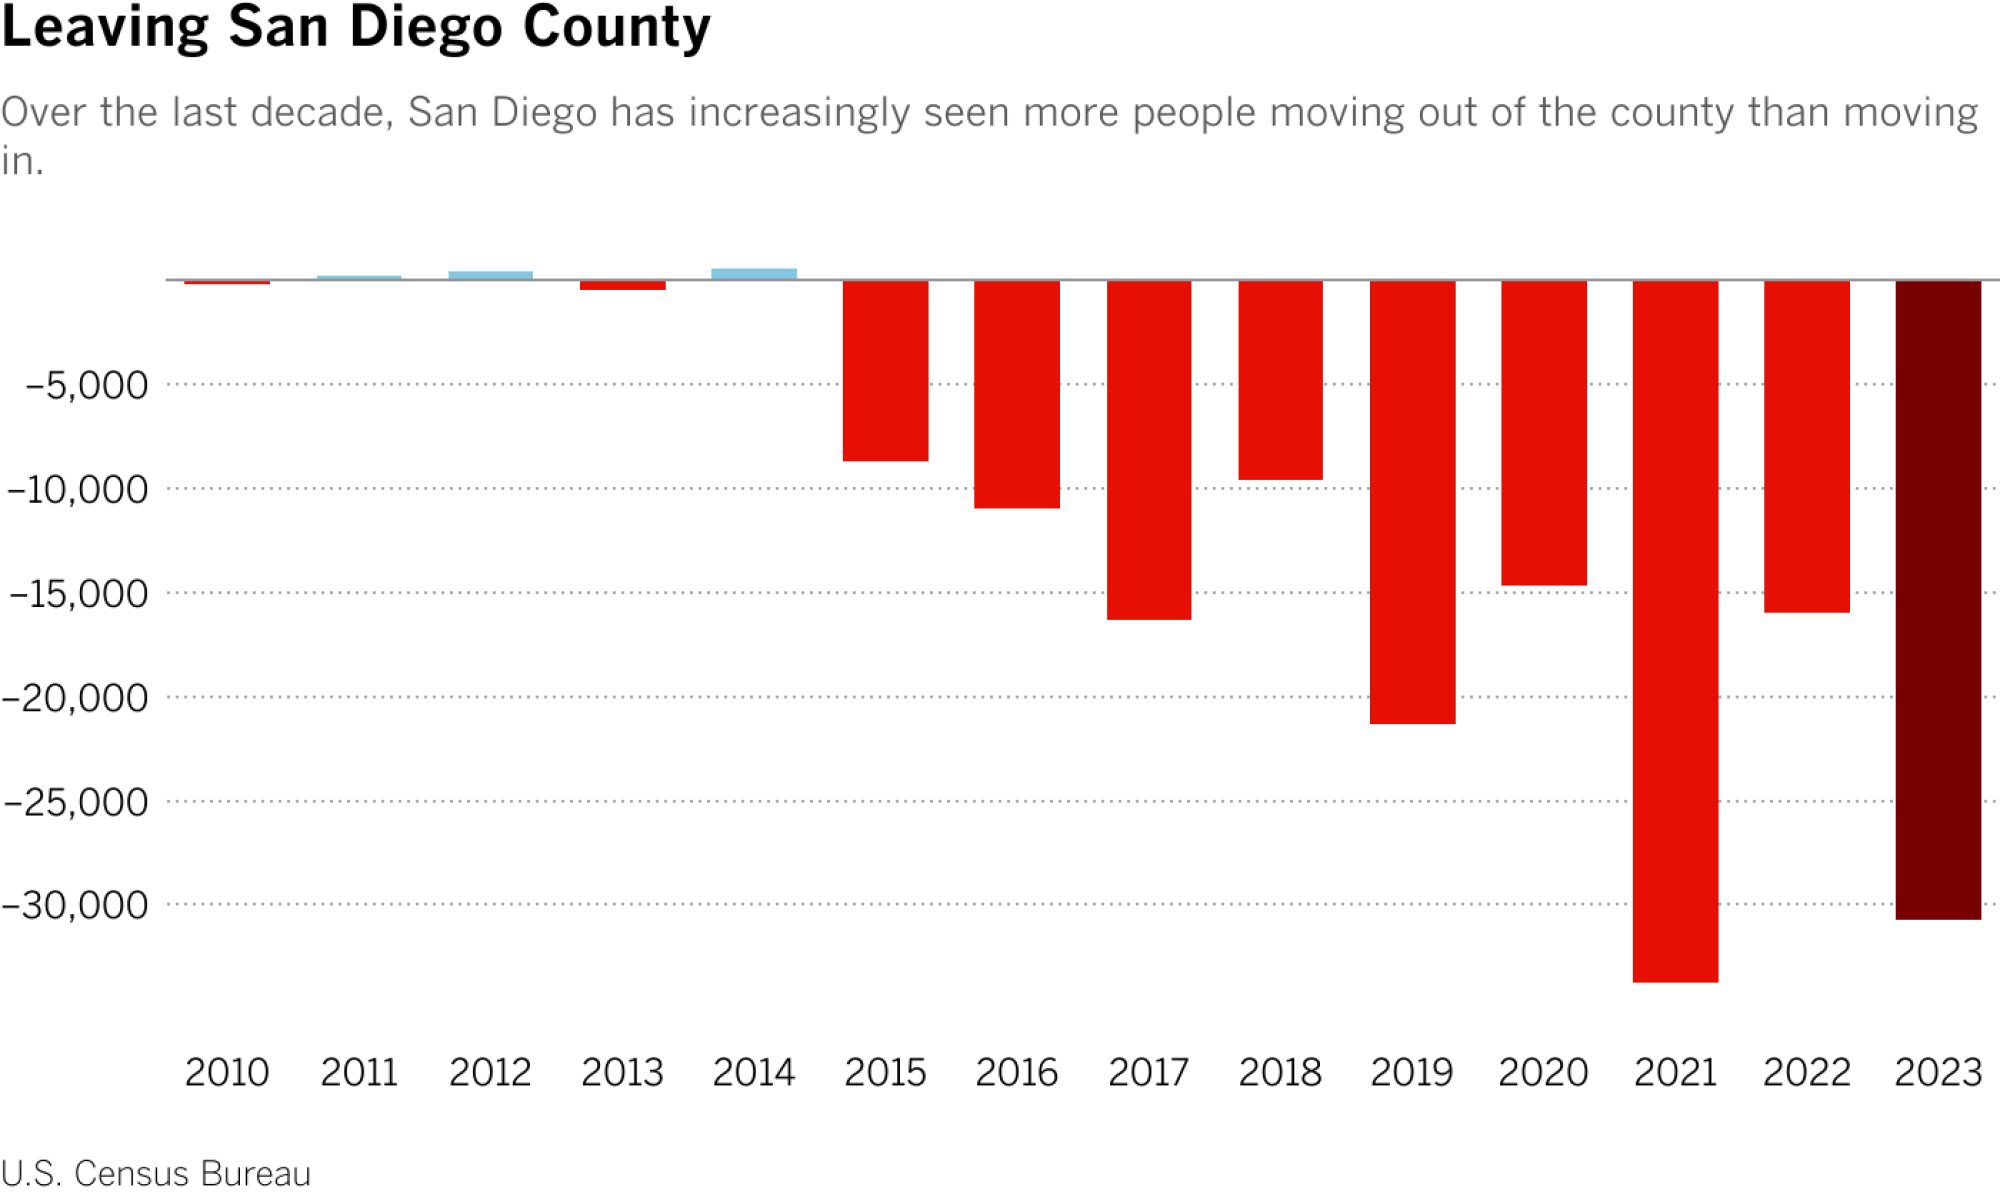 Over the last decade, San Diego has increasingly seen more people moving out of the county than moving in.